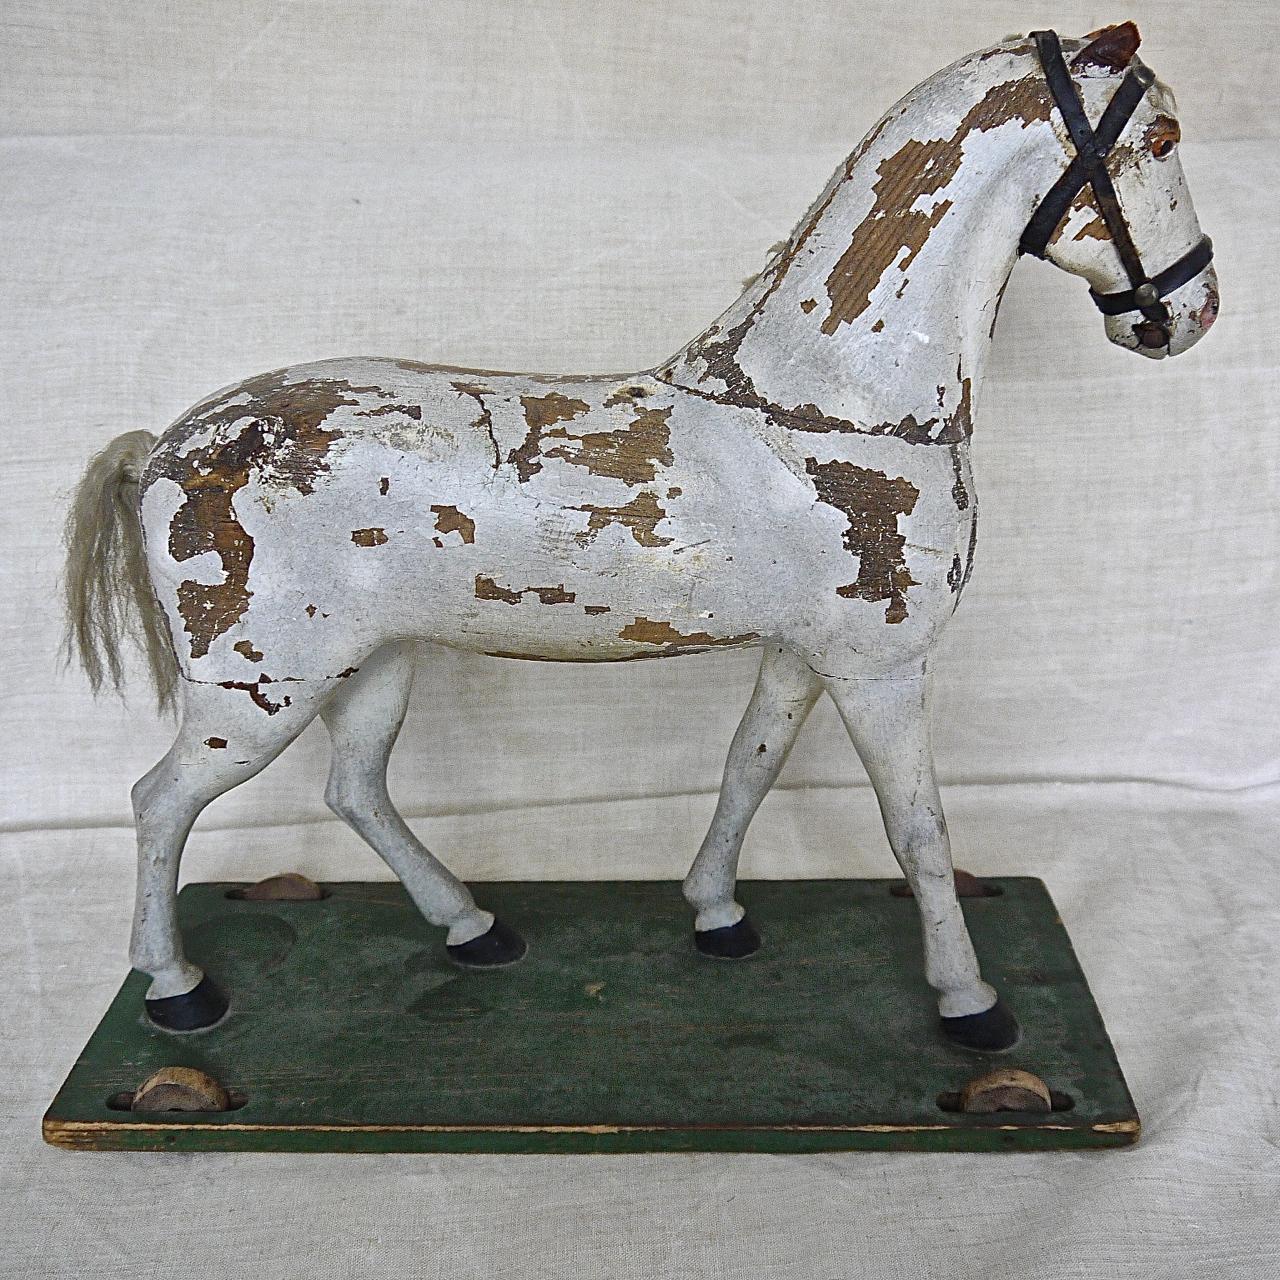 Beautiful Swedish 19th century painted carved wooden toy horse with a very elegant stance. Painted white and mounted on a green painted base with wooden wheels. With leather ears and harness and a combed wool tail and the remains of a wool mane on